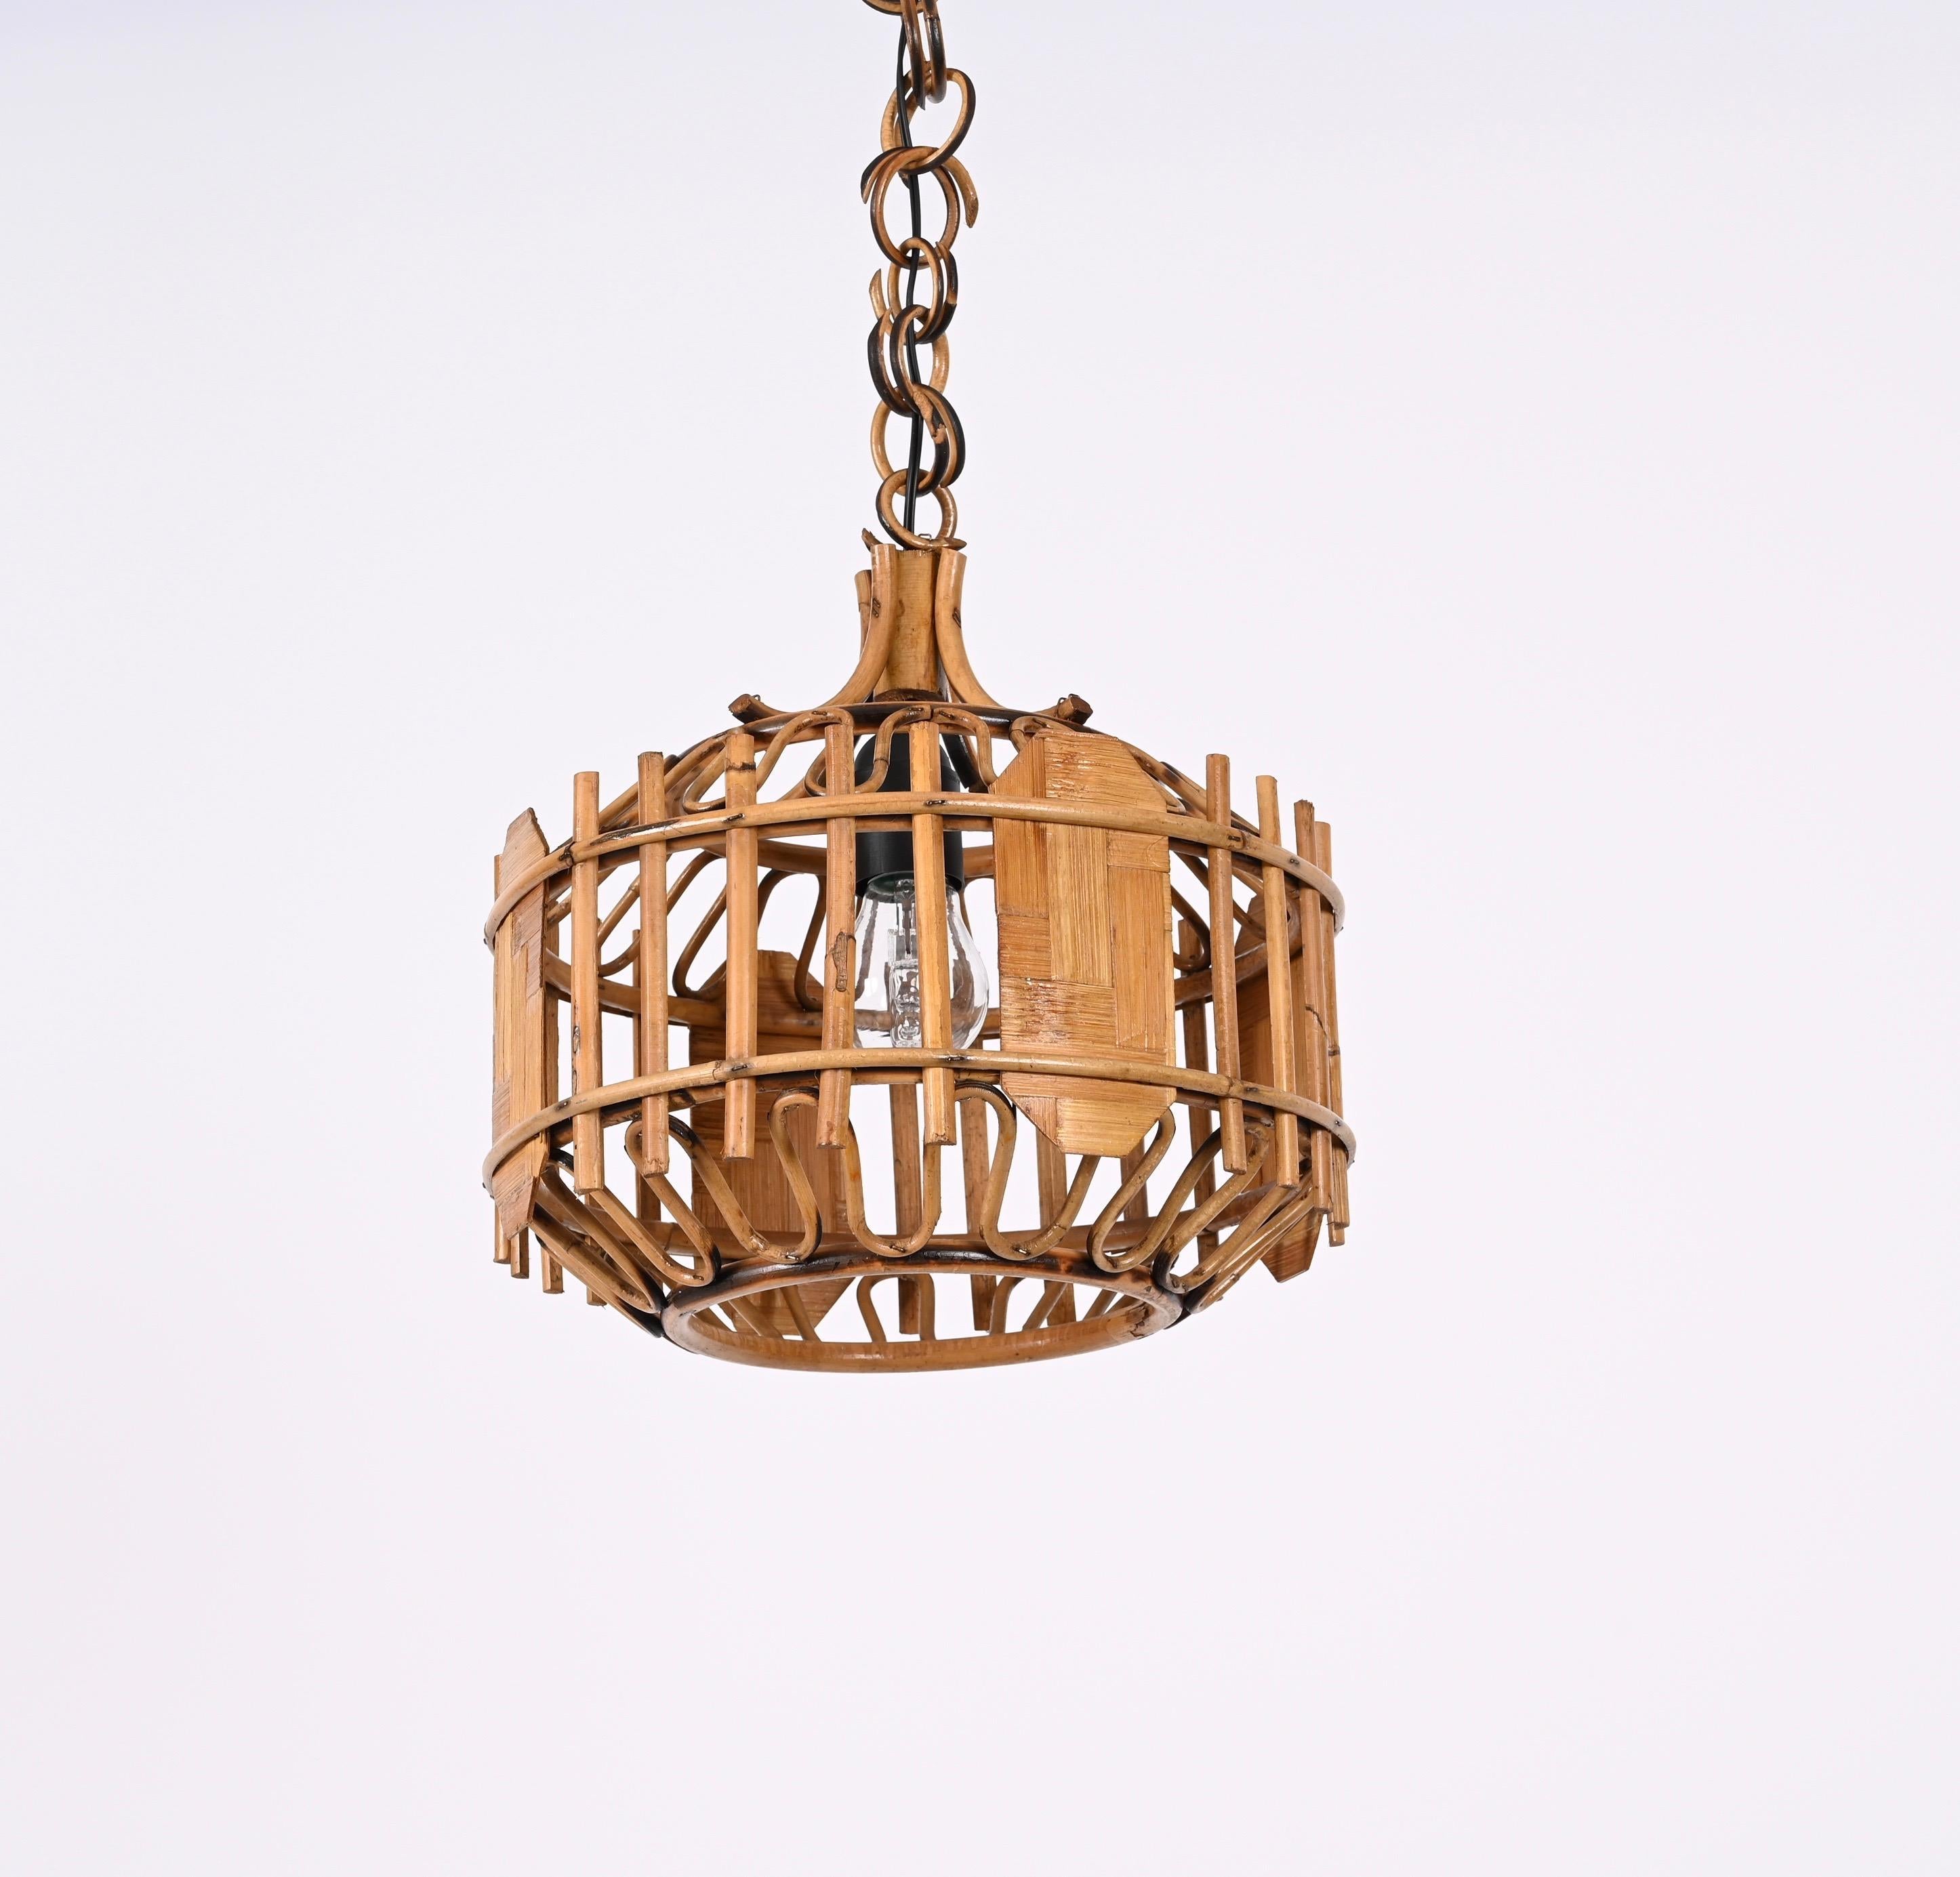 Midcentury French Riviera Bambo and Rattan Rounded Italian Chandelier, 1960s For Sale 5